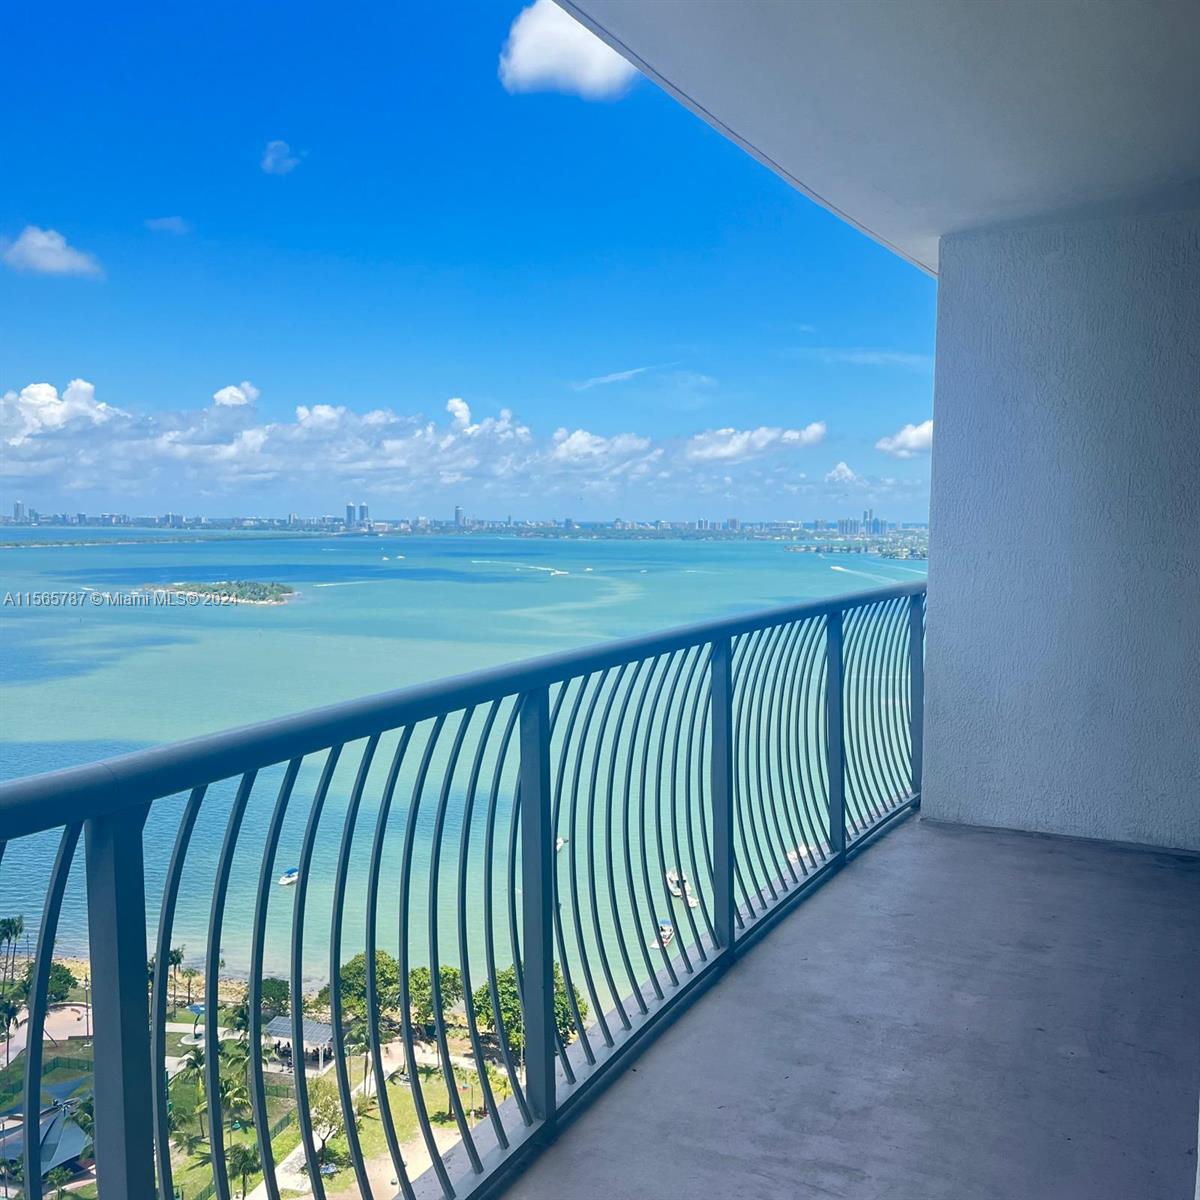 Stunning bay-view condo at Opera Tower! This one-bedroom, one-bathroom oasis offers a modern, elegant space with high-end finishes and an open floor plan for comfort and sophisticated living. Kitchen features top-of-the-line stainless steel appliances, granite countertops, and ample cabinets. Strategically located in the heart of Miami, with quick access to downtown and Brickell for world-class dining, exclusive shops, and vibrant nightlife. Opera Tower offers luxury amenities: state-of-the-art gym, relaxing pool, rejuvenating spa, first-class concierge, and secure parking.